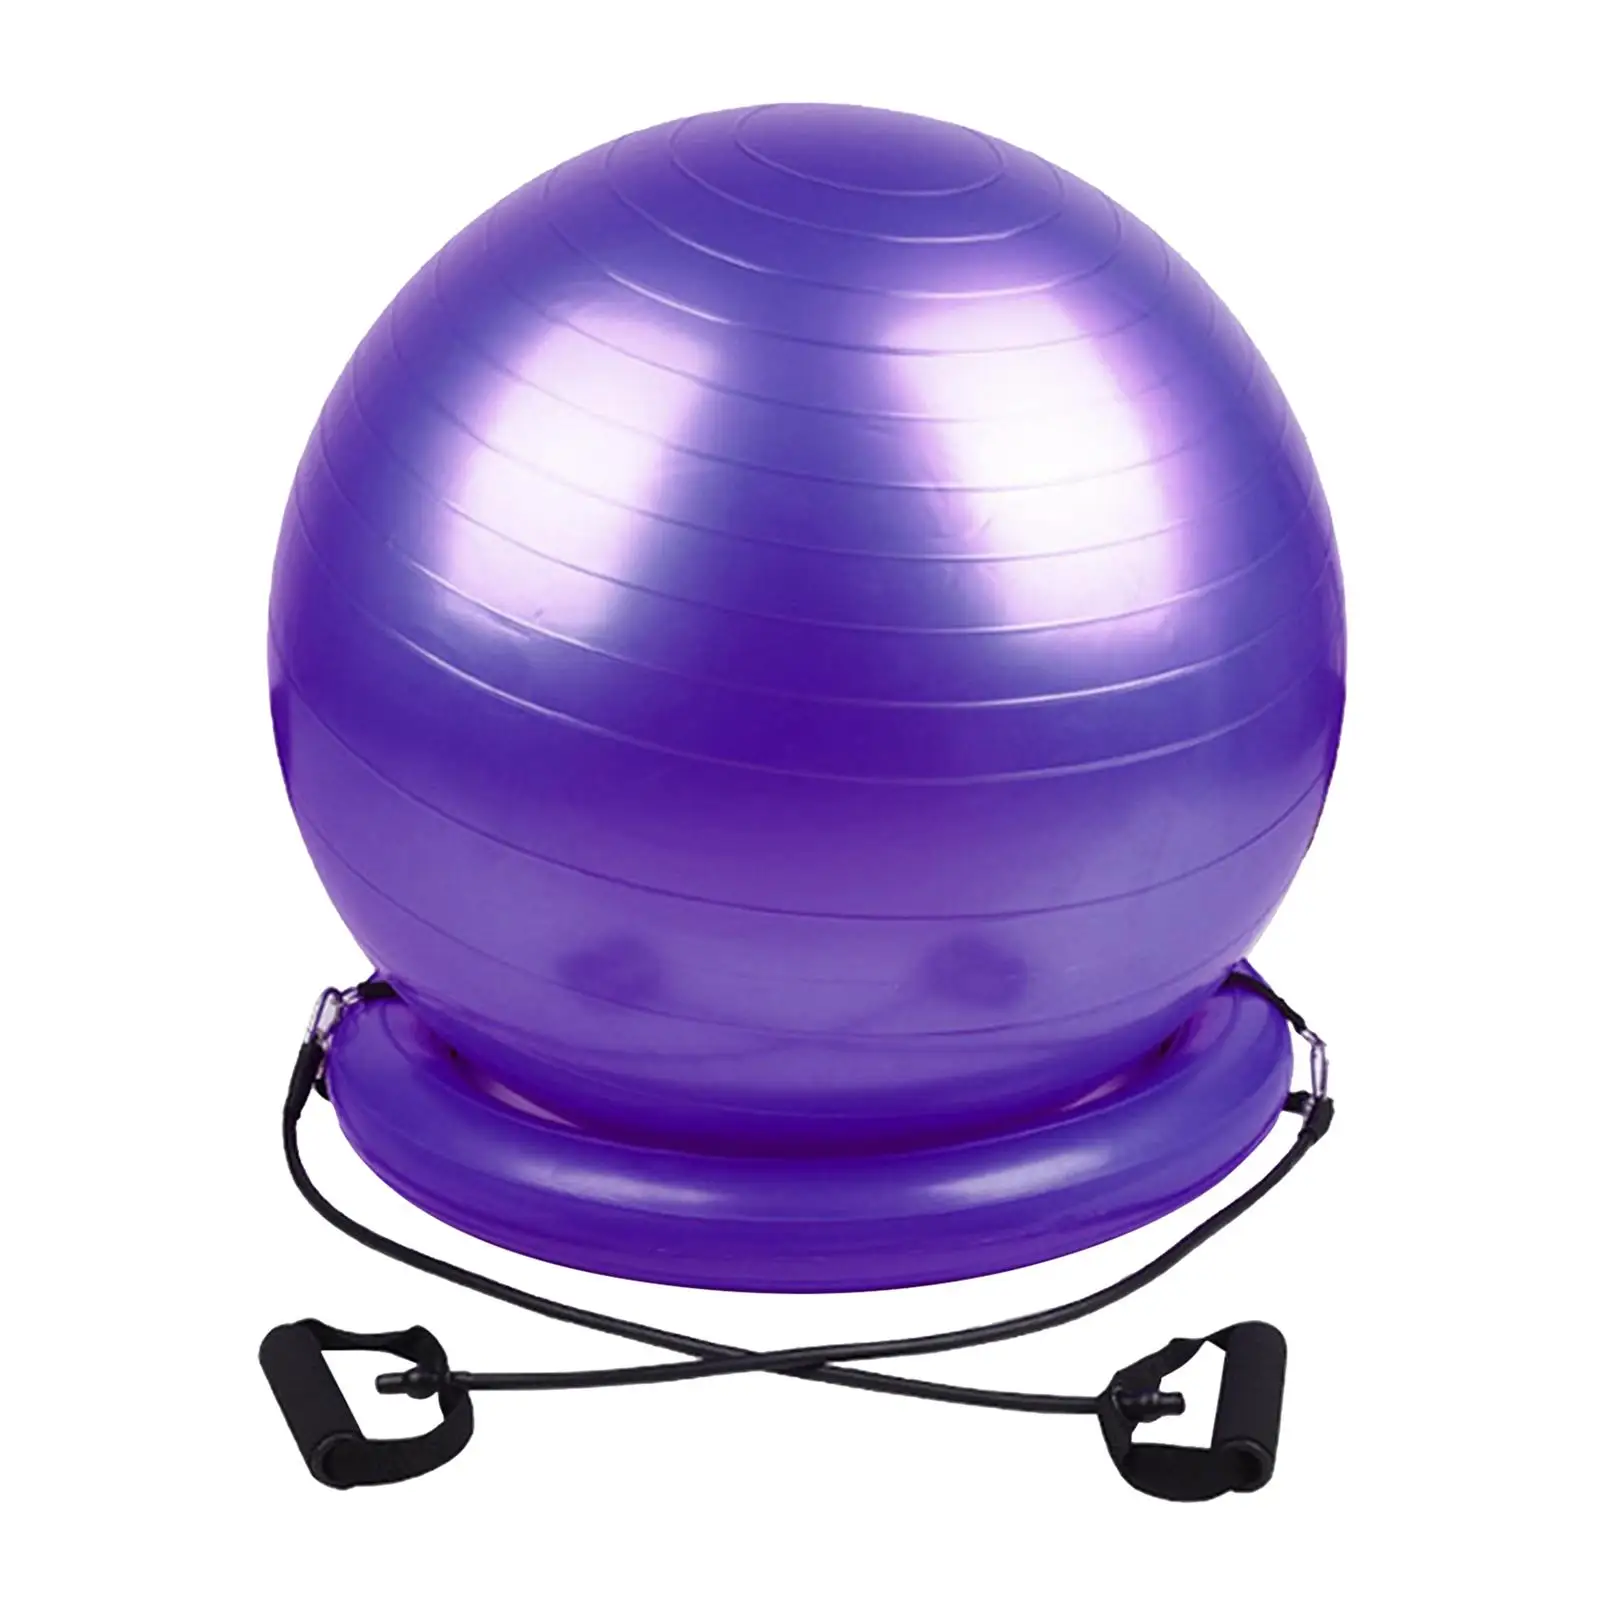 65cm Exercise Ball Chair Yoga Fitness Workout Stability Base Home